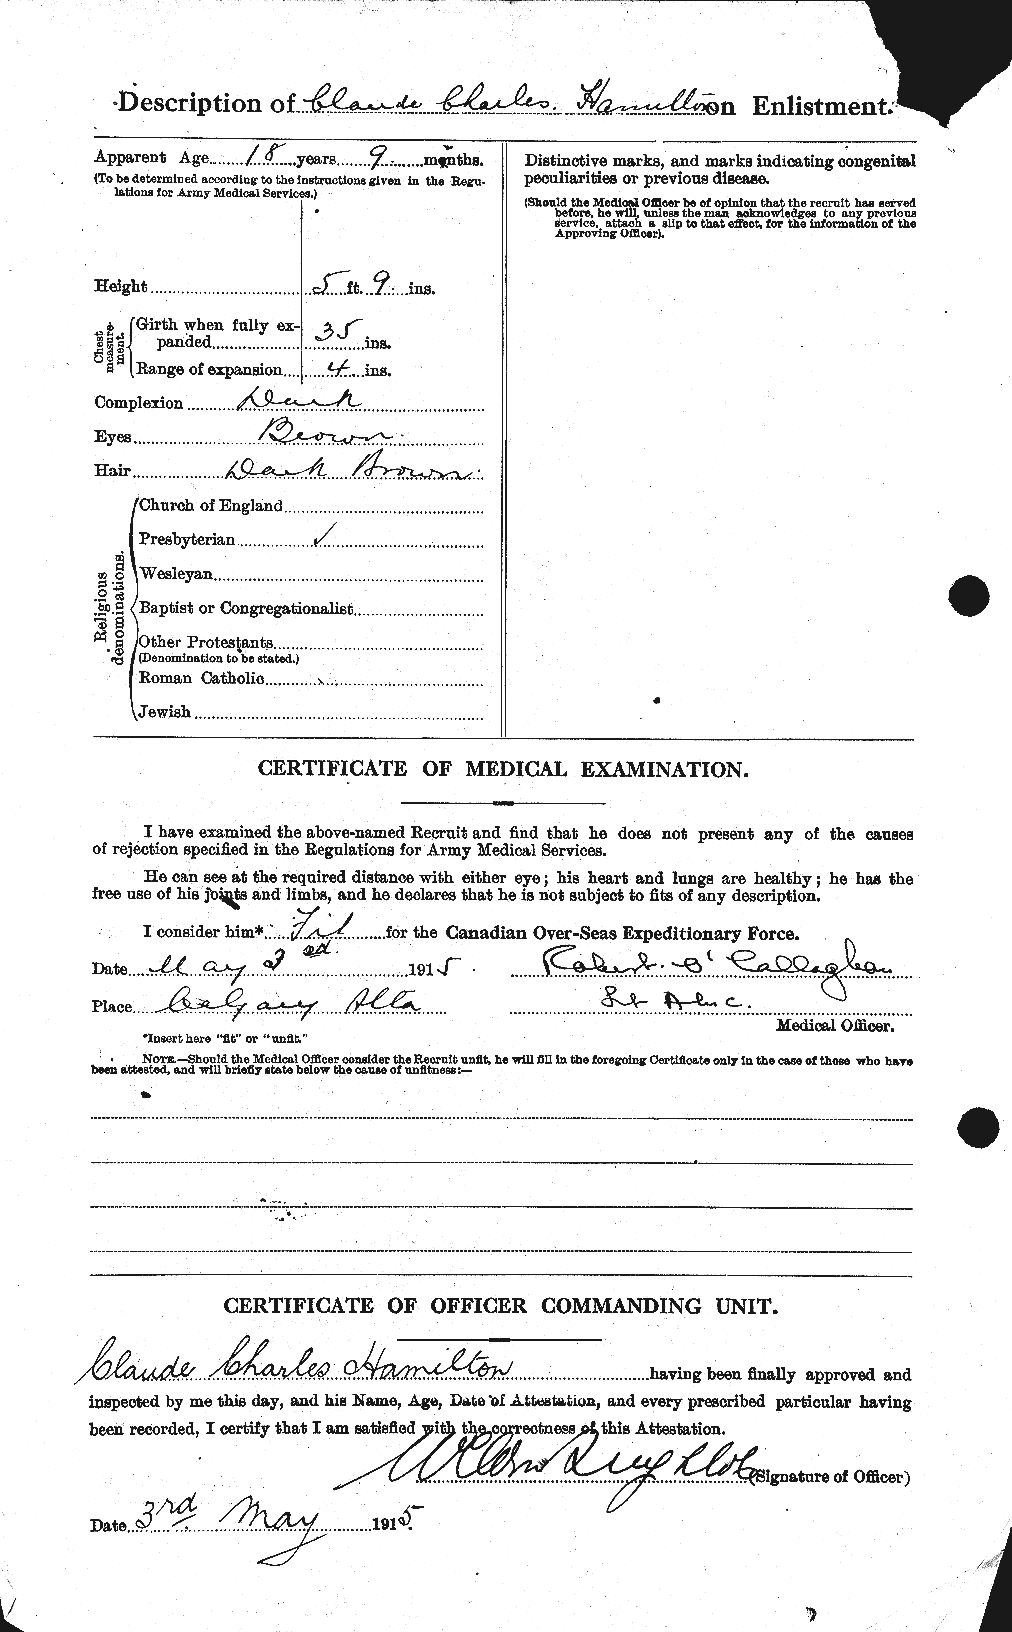 Personnel Records of the First World War - CEF 375325b